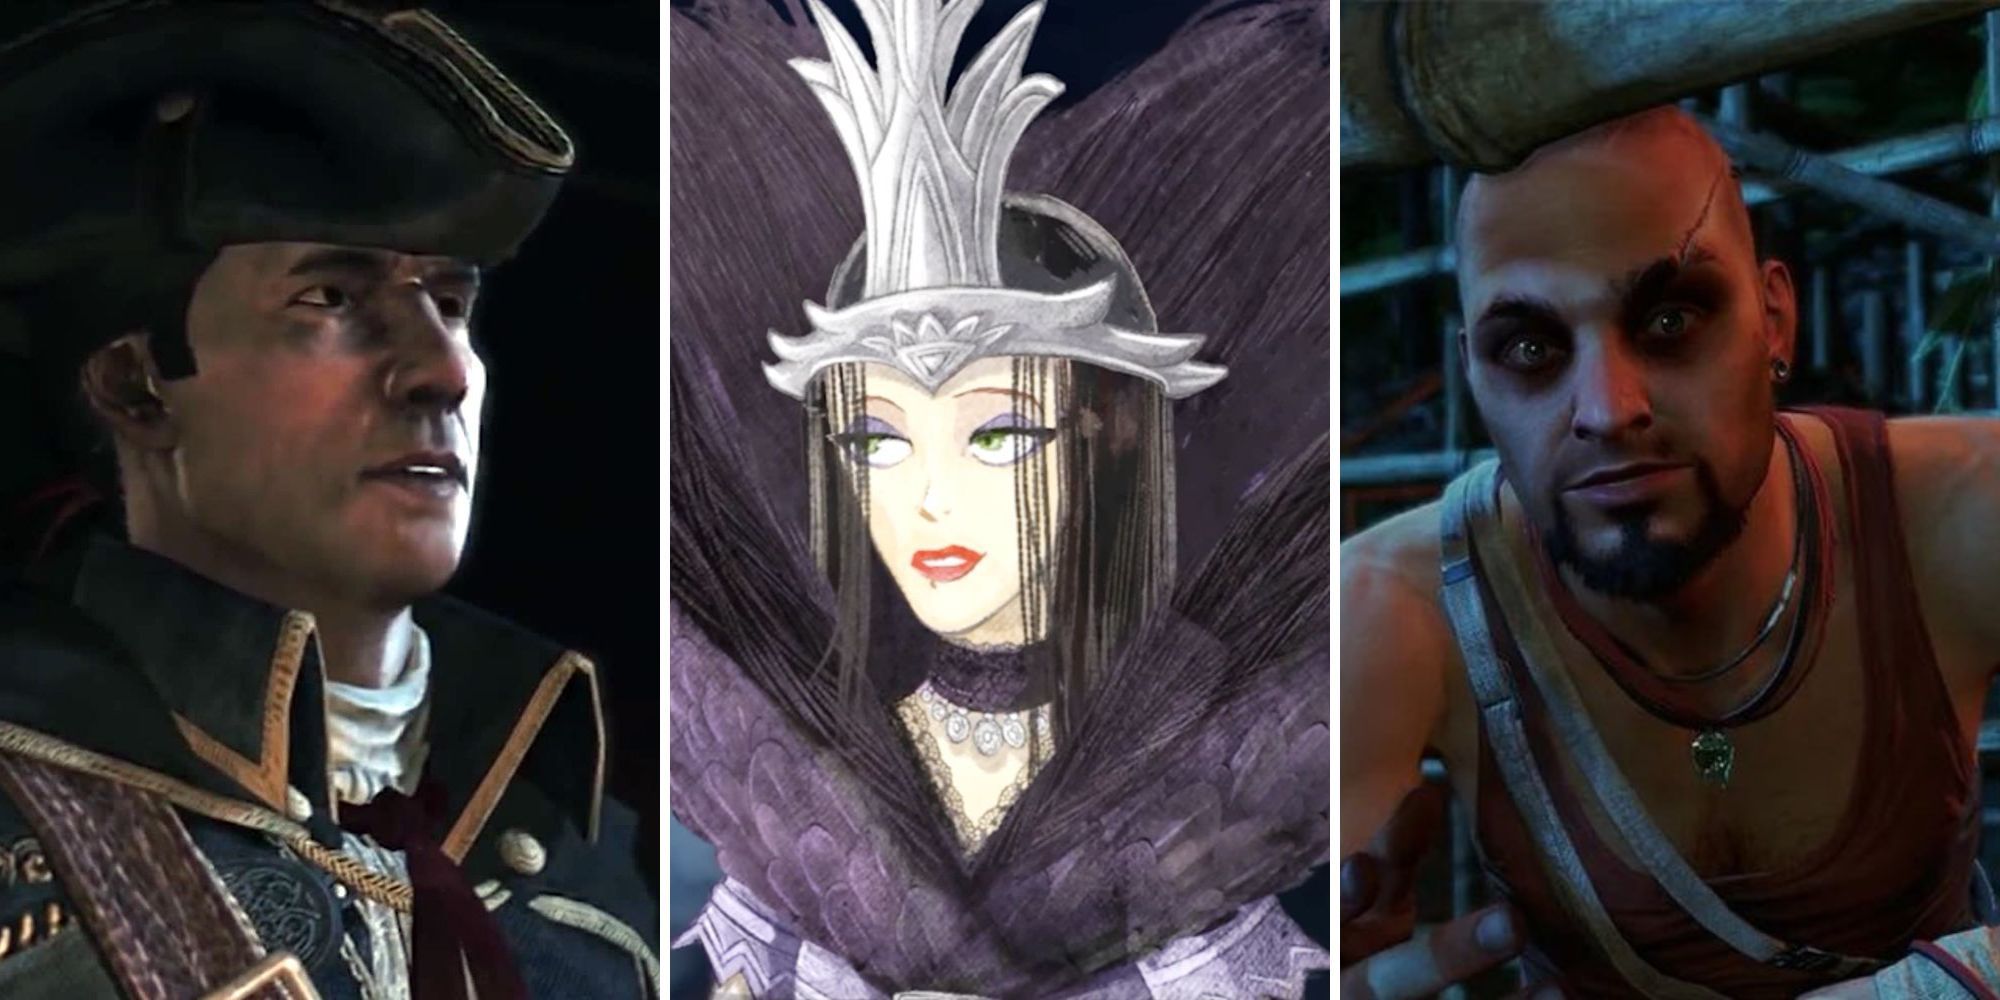 A grid of images showing close ups of the villains from the Ubisoft games Assassin's Creed 3, Child of Light, and Far Cry 3